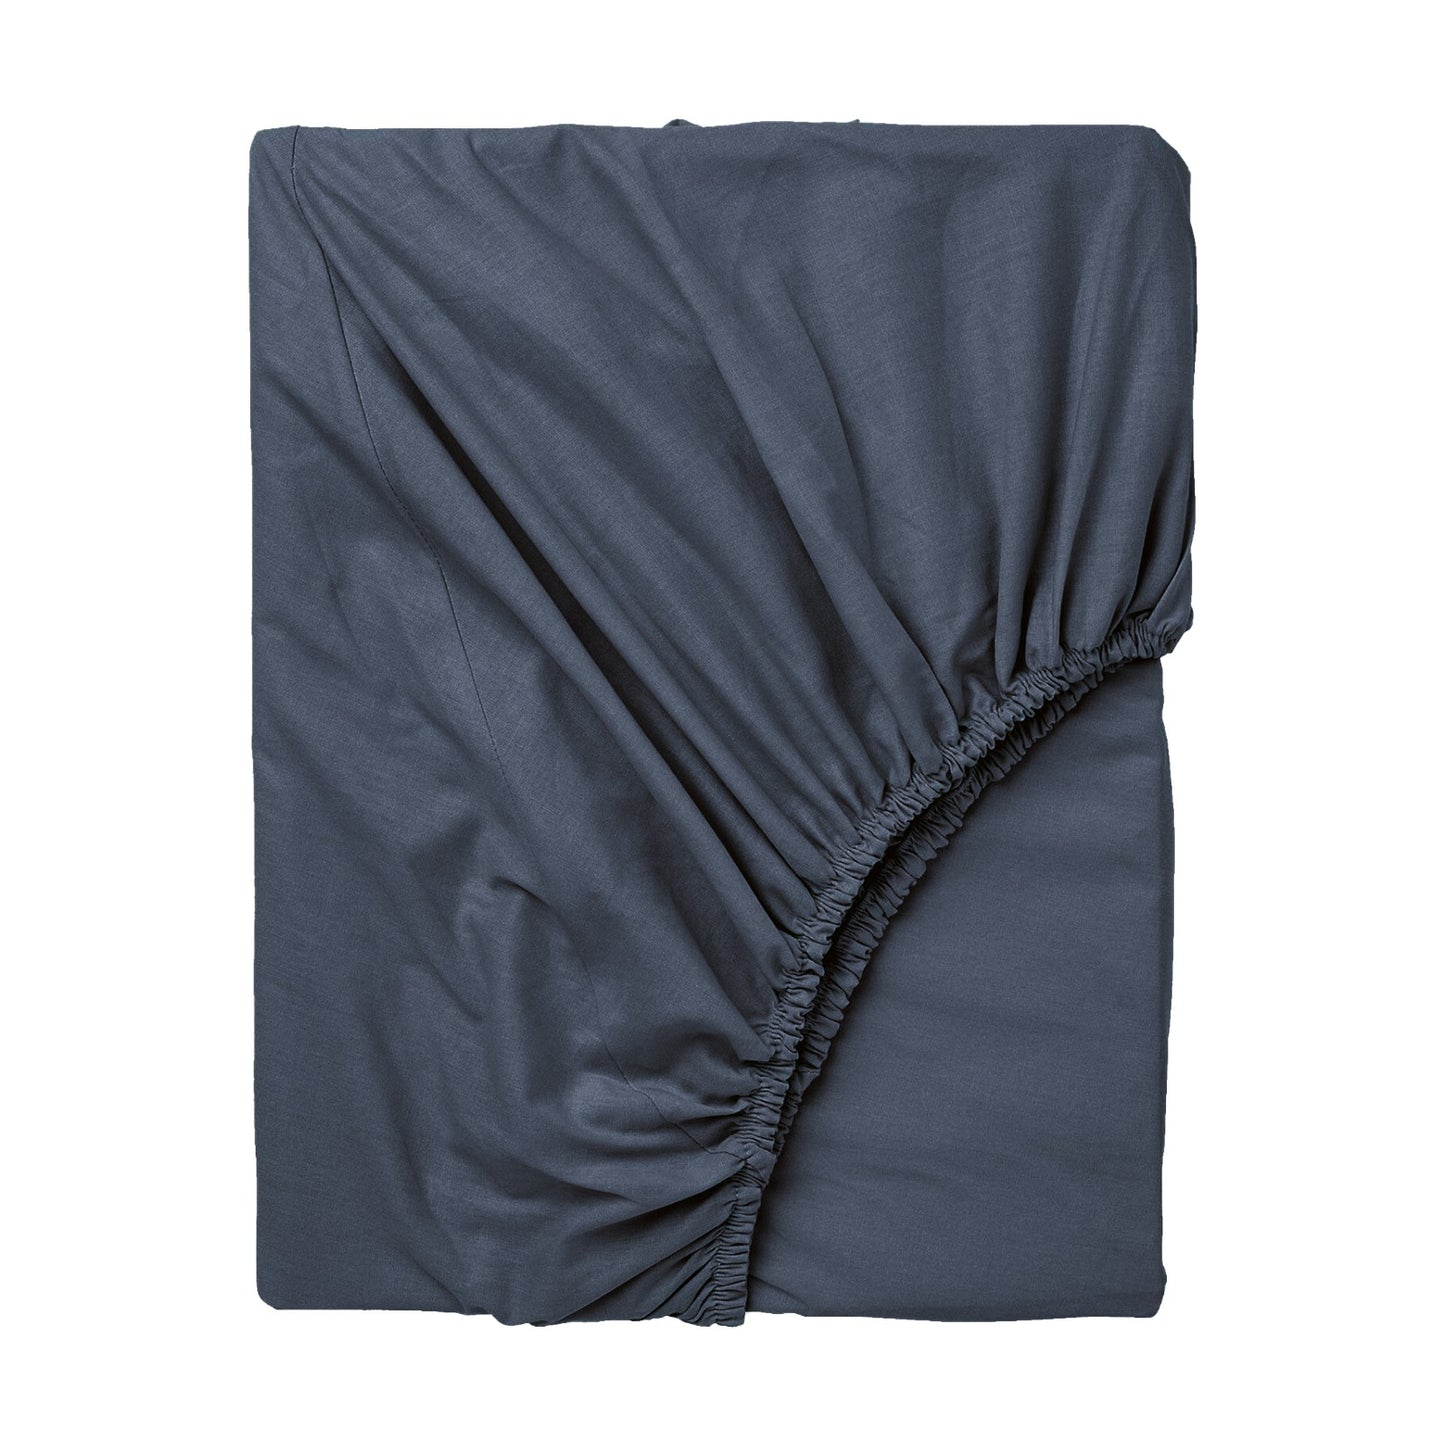 Navy blue  - fitted sheet - king size (3-pcs)